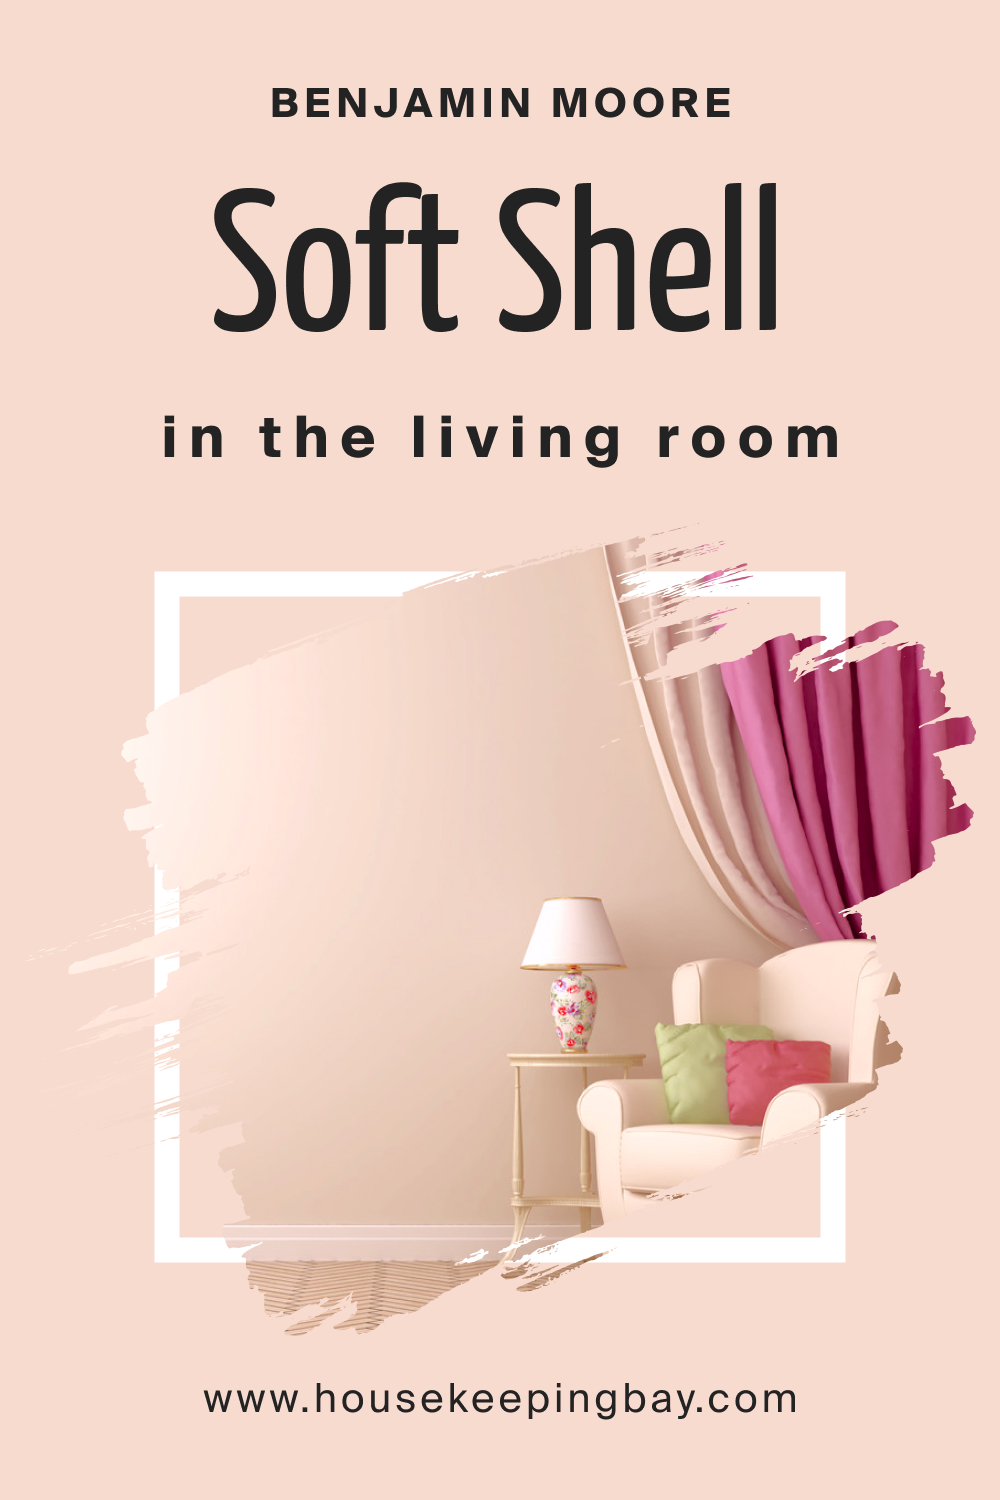 Benjamin Moore. Soft Shell 015 in the Living Room